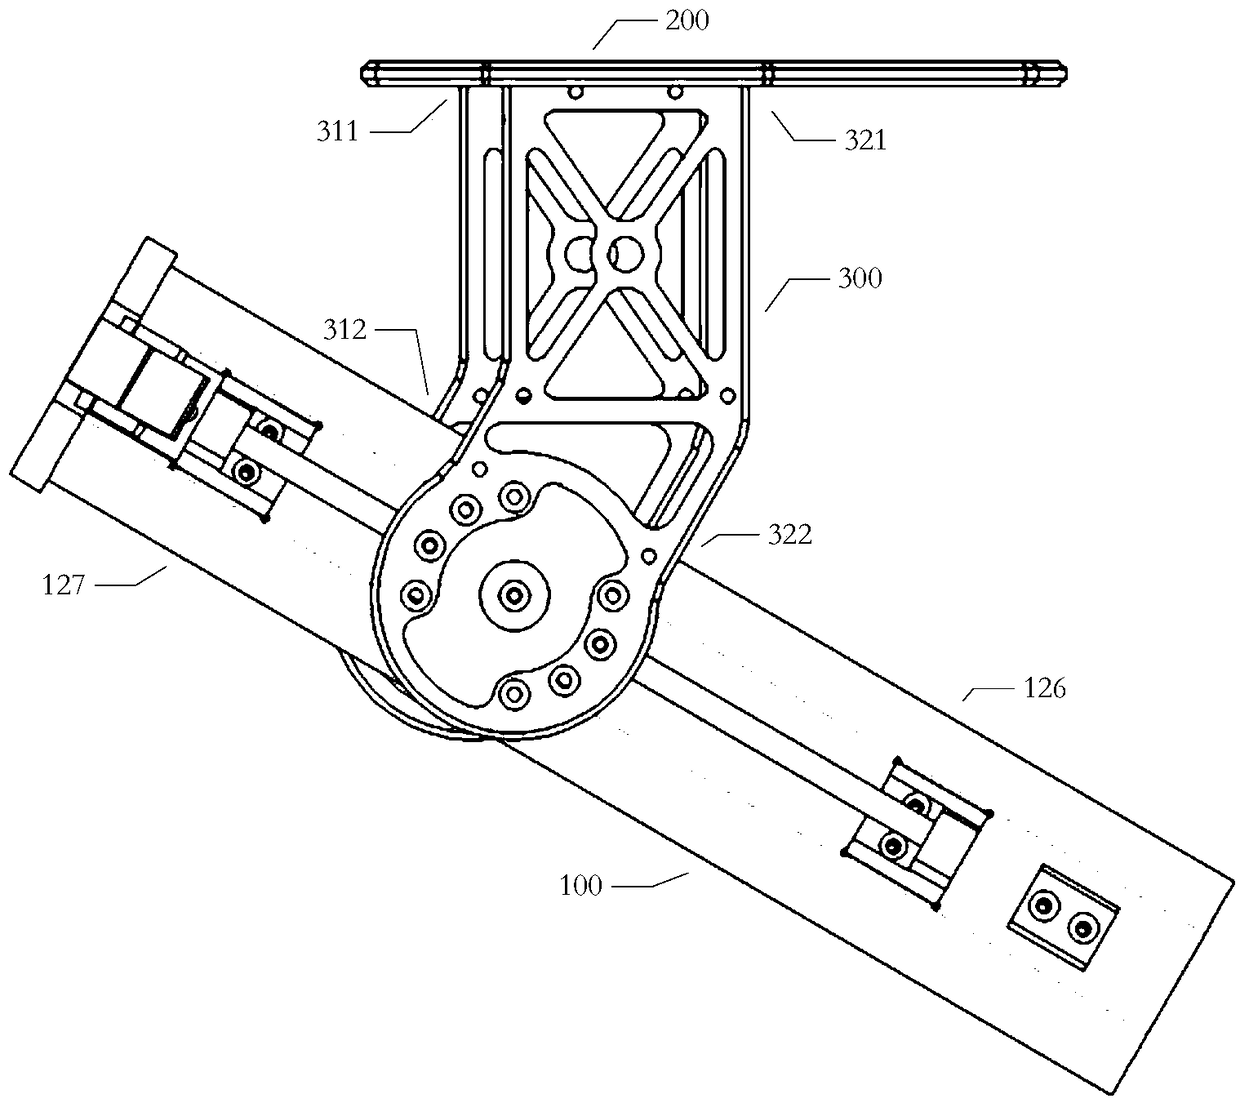 Power bearing structure for an unmanned aerial vehicle